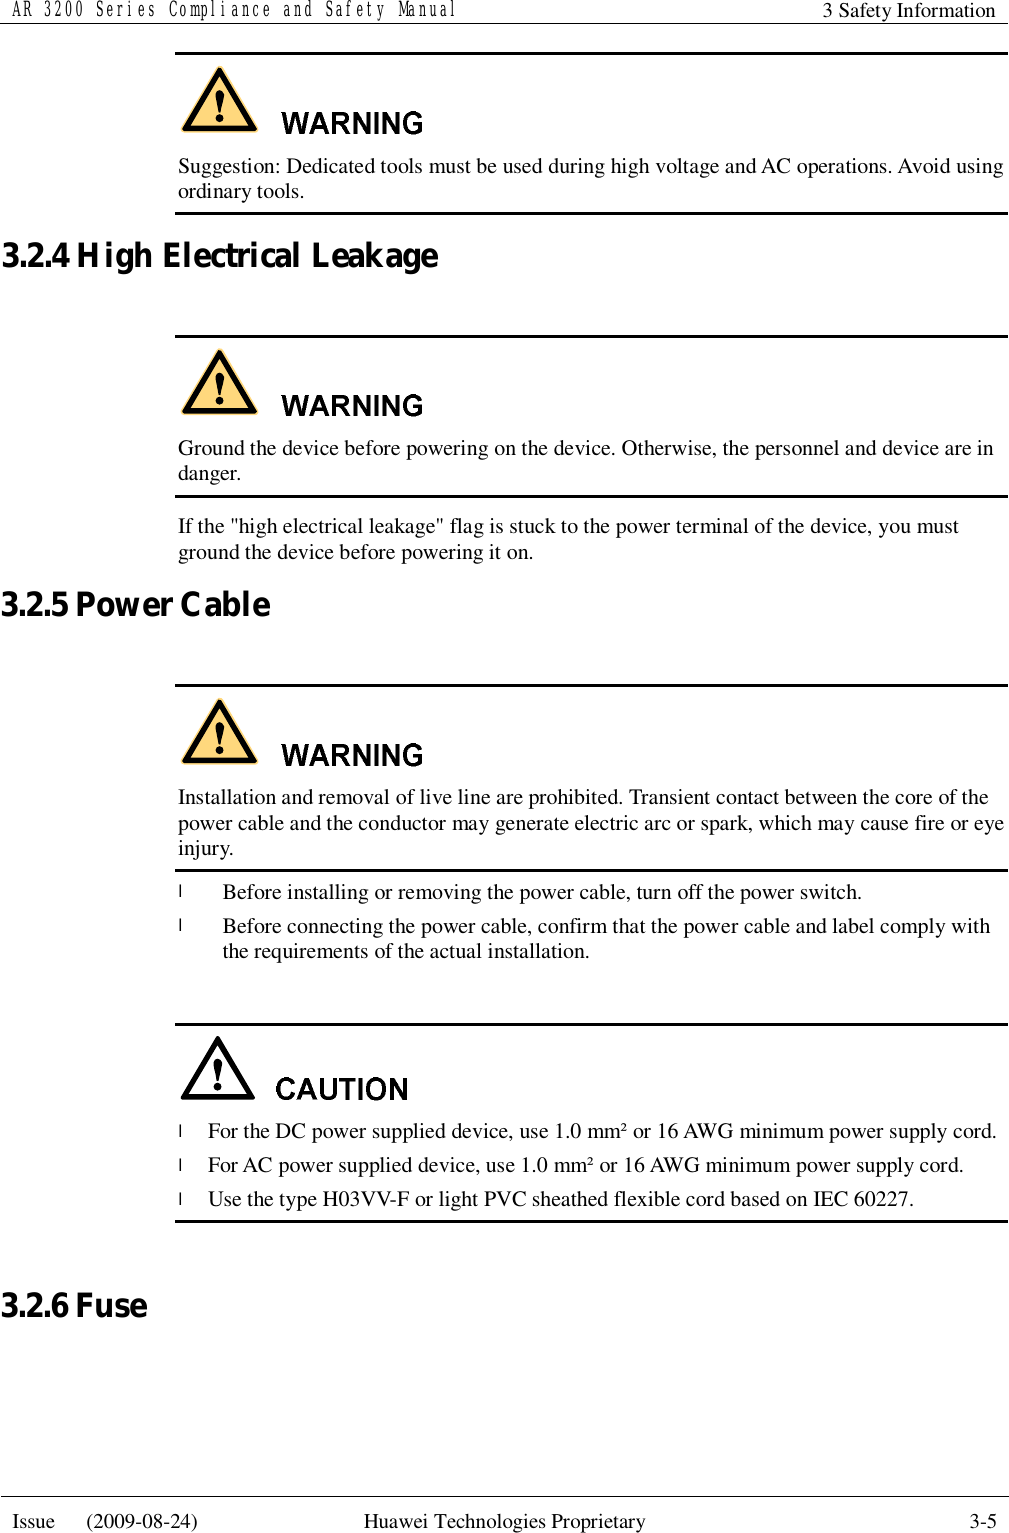 AR 3200 Series Compliance and Safety Manual 3 Safety Information  Issue   (2009-08-24)  Huawei Technologies Proprietary  3-5   Suggestion: Dedicated tools must be used during high voltage and AC operations. Avoid using ordinary tools. 3.2.4 High Electrical Leakage   Ground the device before powering on the device. Otherwise, the personnel and device are in danger. If the &quot;high electrical leakage&quot; flag is stuck to the power terminal of the device, you must ground the device before powering it on. 3.2.5 Power Cable   Installation and removal of live line are prohibited. Transient contact between the core of the power cable and the conductor may generate electric arc or spark, which may cause fire or eye injury. l Before installing or removing the power cable, turn off the power switch. l Before connecting the power cable, confirm that the power cable and label comply with the requirements of the actual installation.   l For the DC power supplied device, use 1.0 mm² or 16 AWG minimum power supply cord. l For AC power supplied device, use 1.0 mm² or 16 AWG minimum power supply cord. l Use the type H03VV-F or light PVC sheathed flexible cord based on IEC 60227.  3.2.6 Fuse  